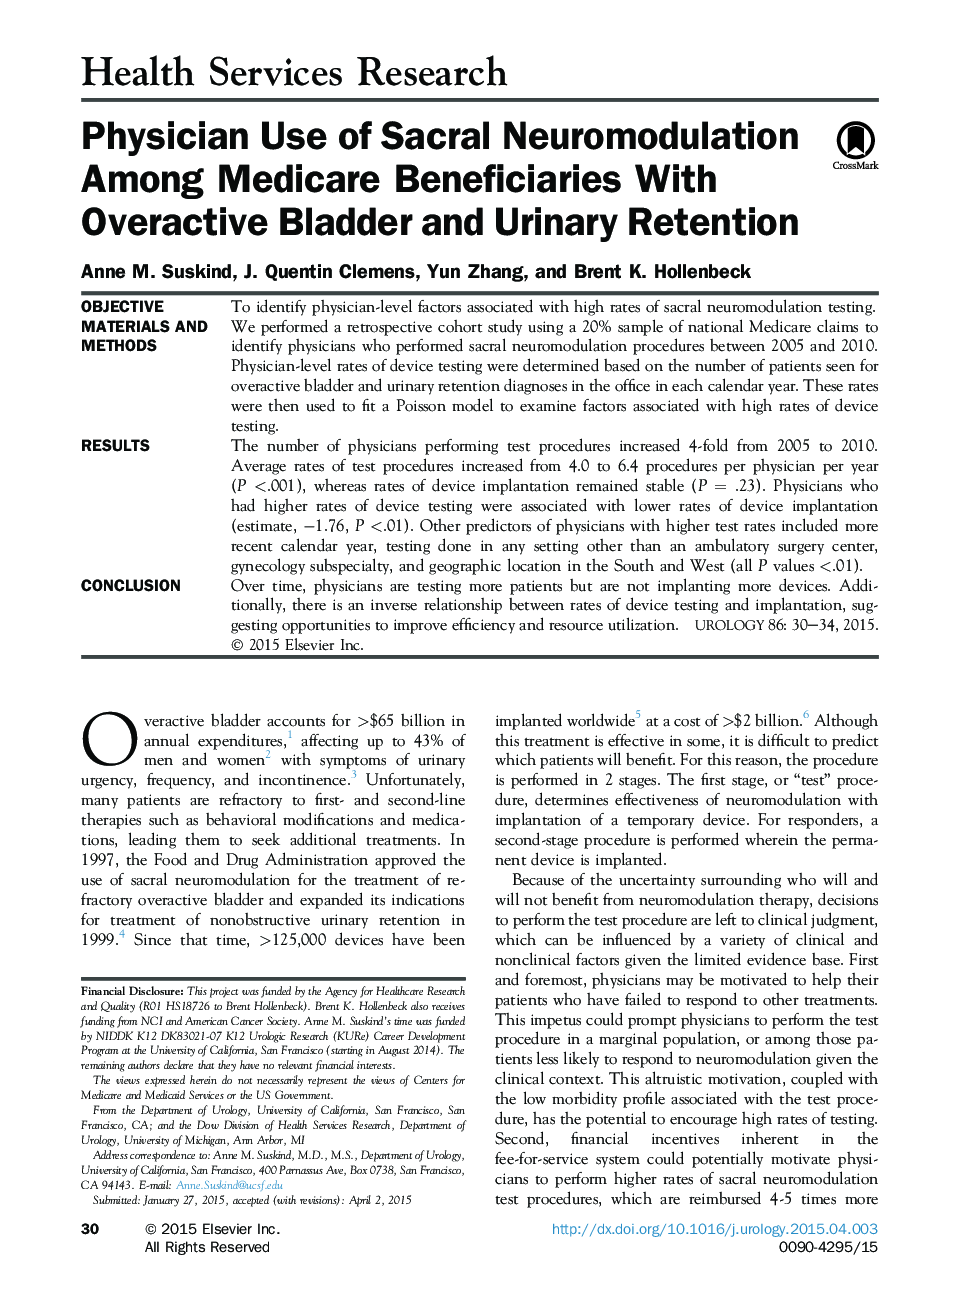 Physician Use of Sacral Neuromodulation Among Medicare Beneficiaries With Overactive Bladder and Urinary Retention 